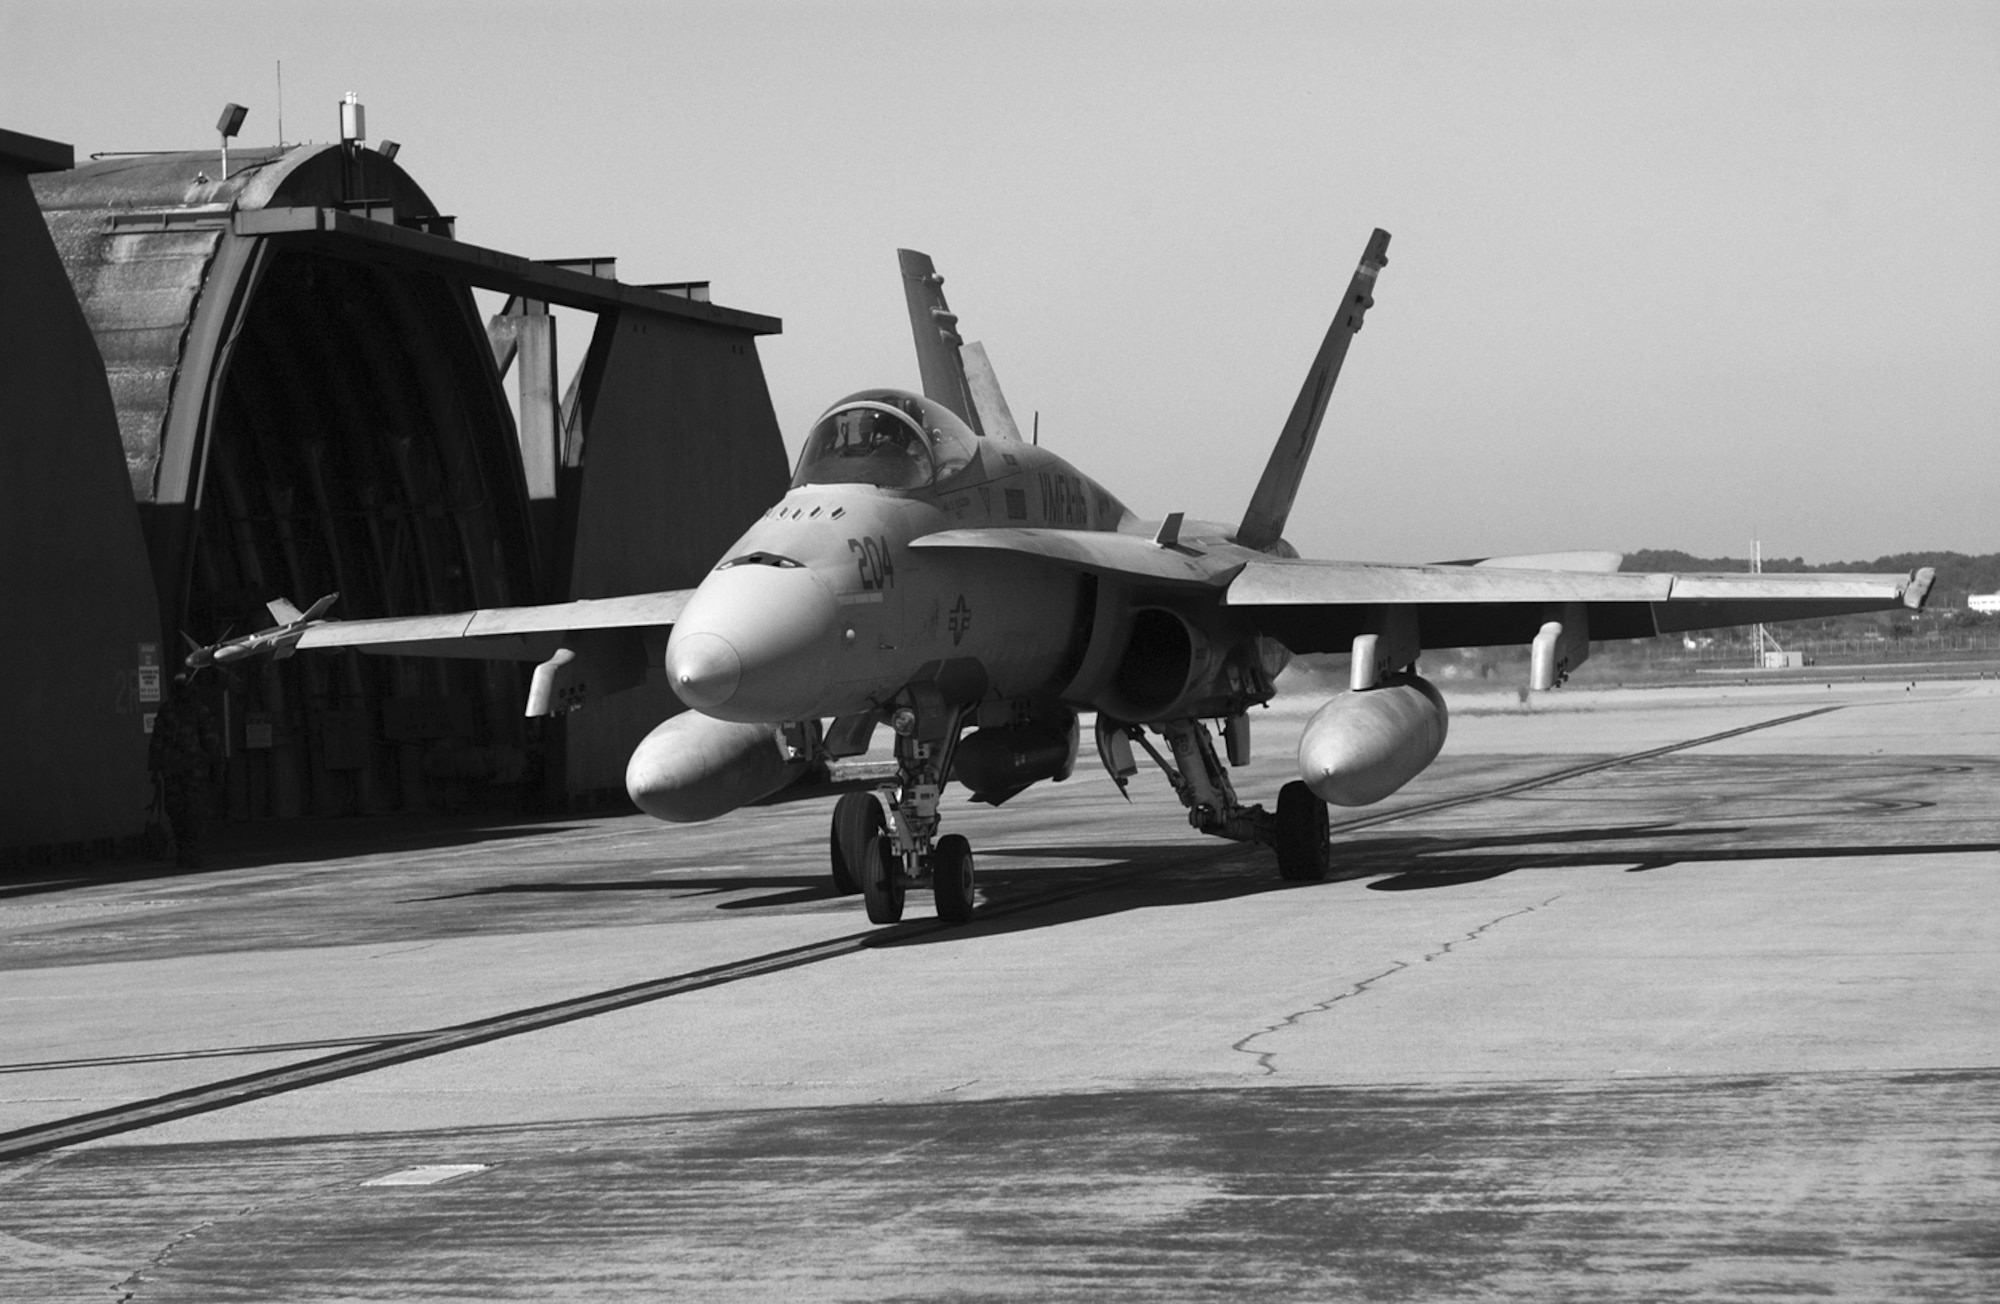 OSAN AIR BASE, Republic of Korea --  A Marine Corps F/A-18 from the VMFA-155 “Silver Eagles” prepares to taxi out onto the runway for a mission. The unit departs Nov. 17 after five weeks of training on Osan. (U.S. Air Force photo by Airman 1st Class Gina Chiaverotti)